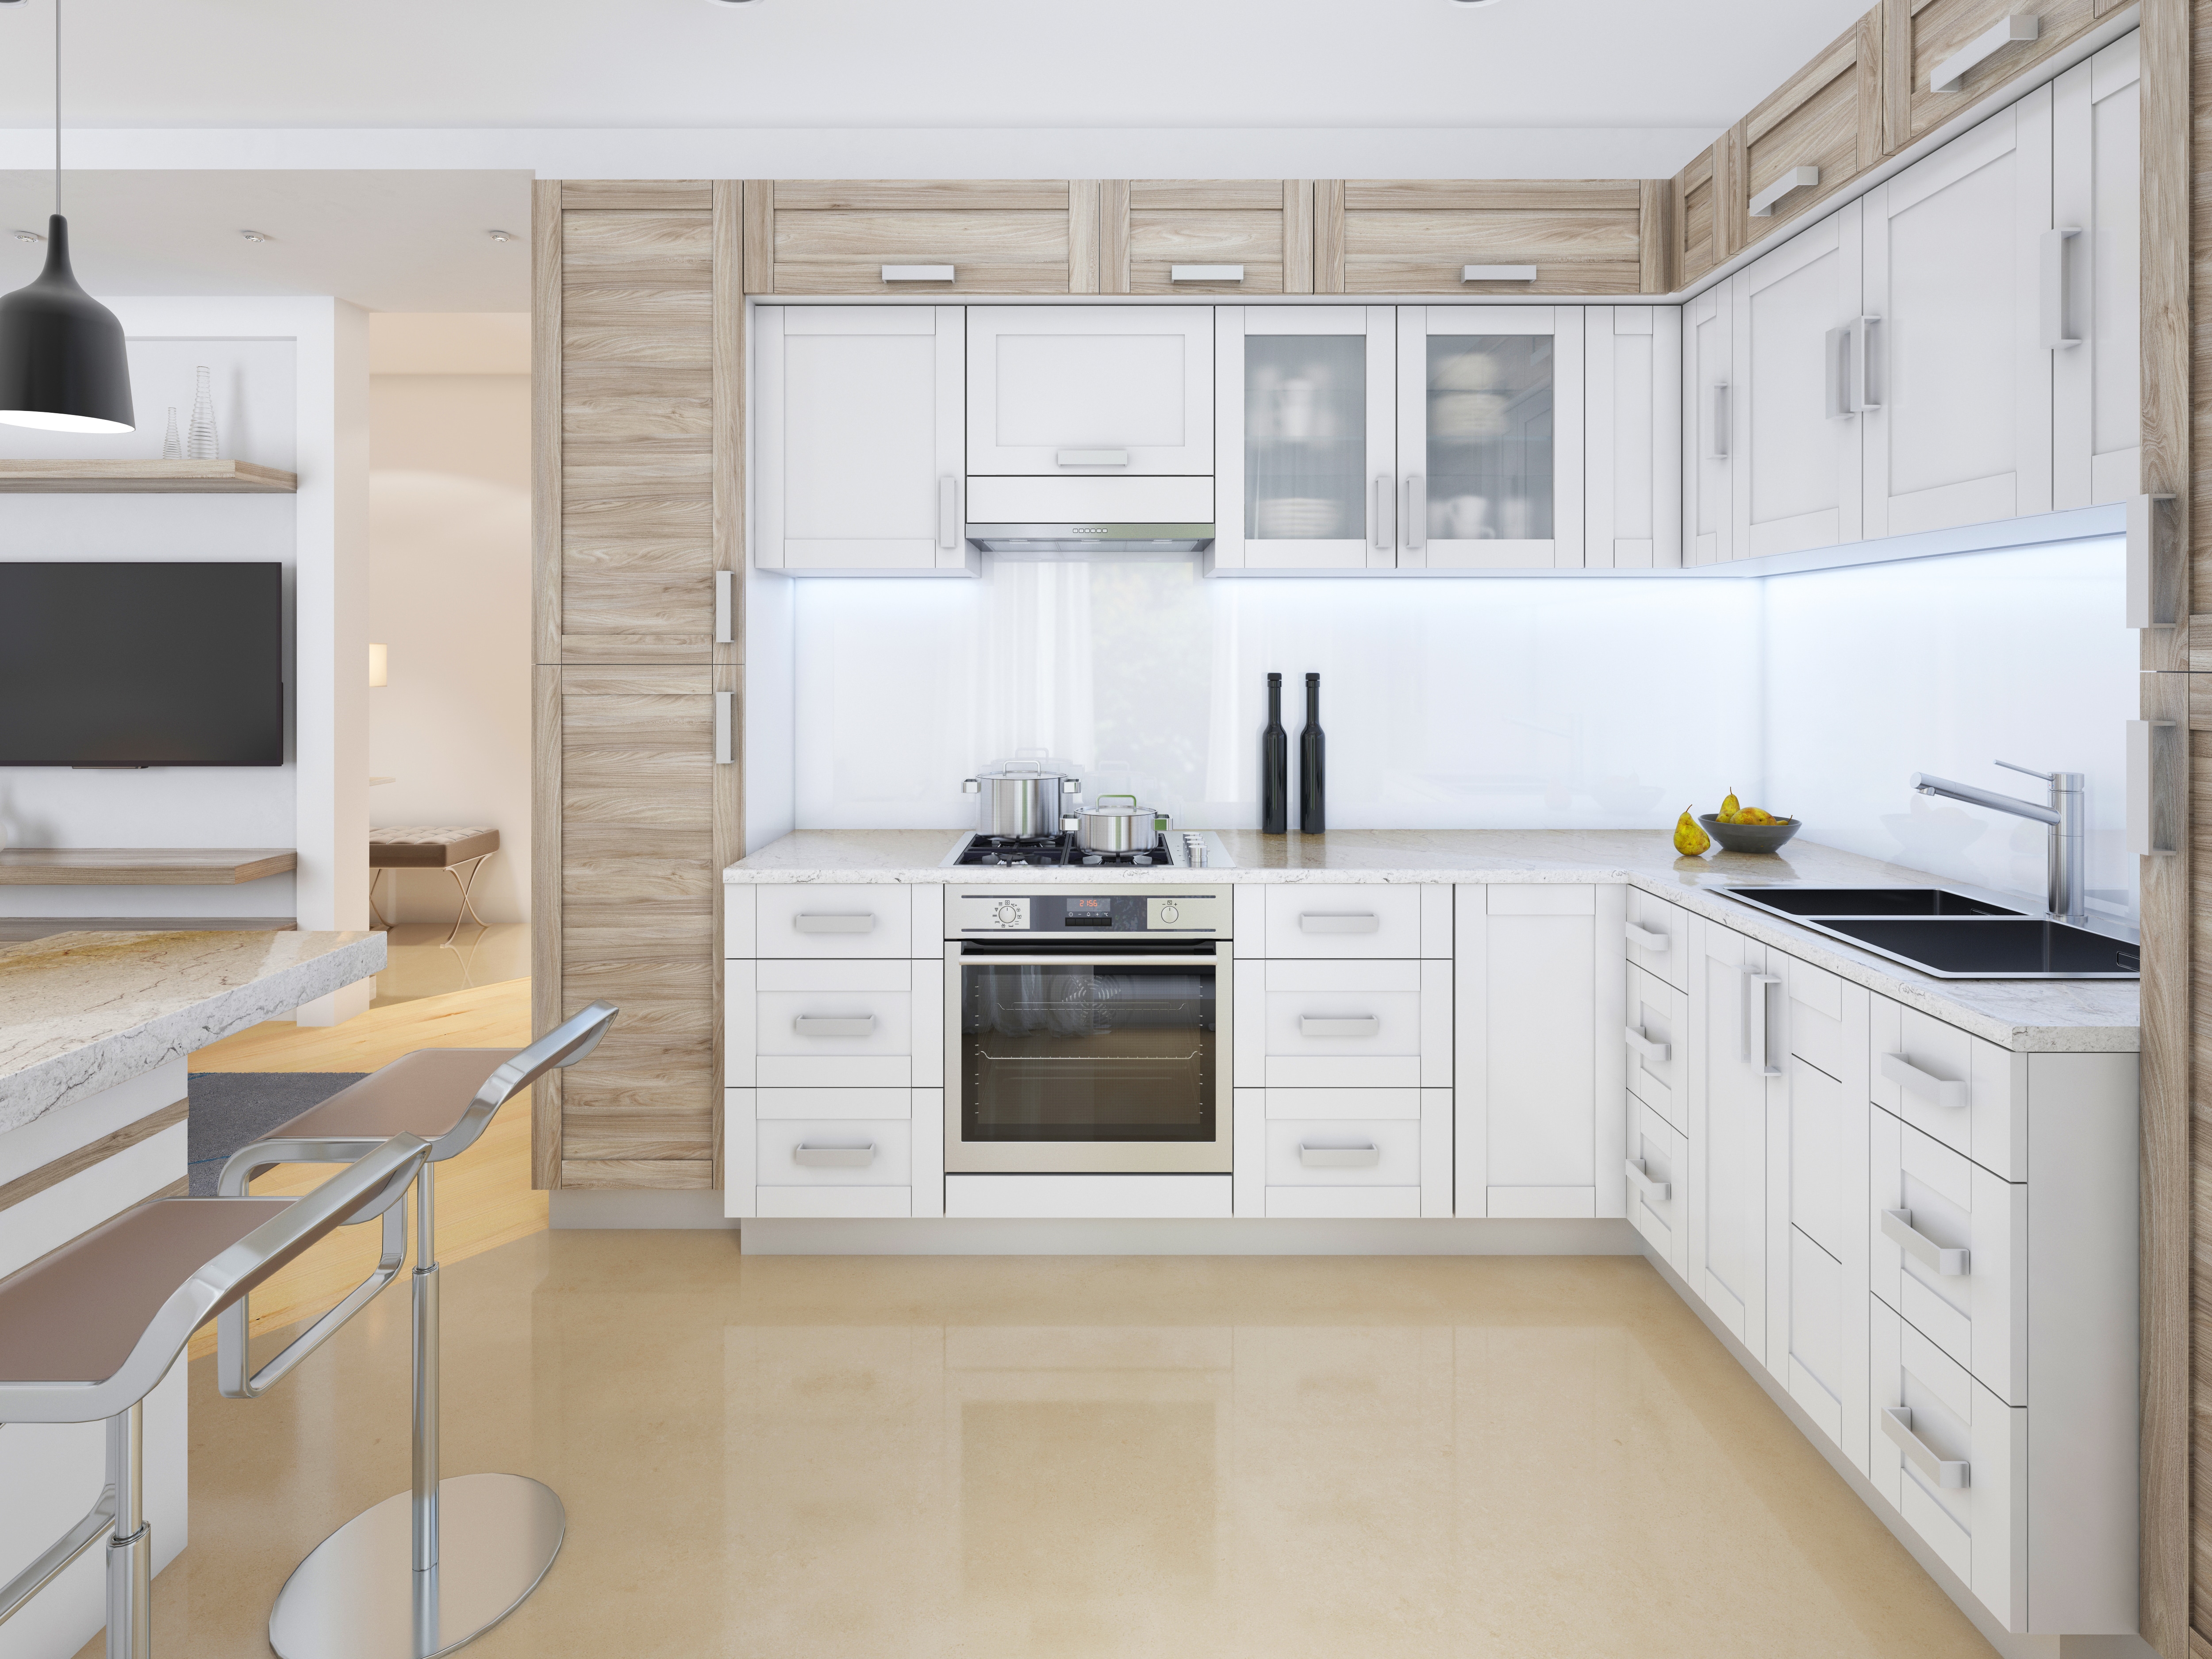 How to Go Modern with White Shaker Cabinets - Best Online ...
